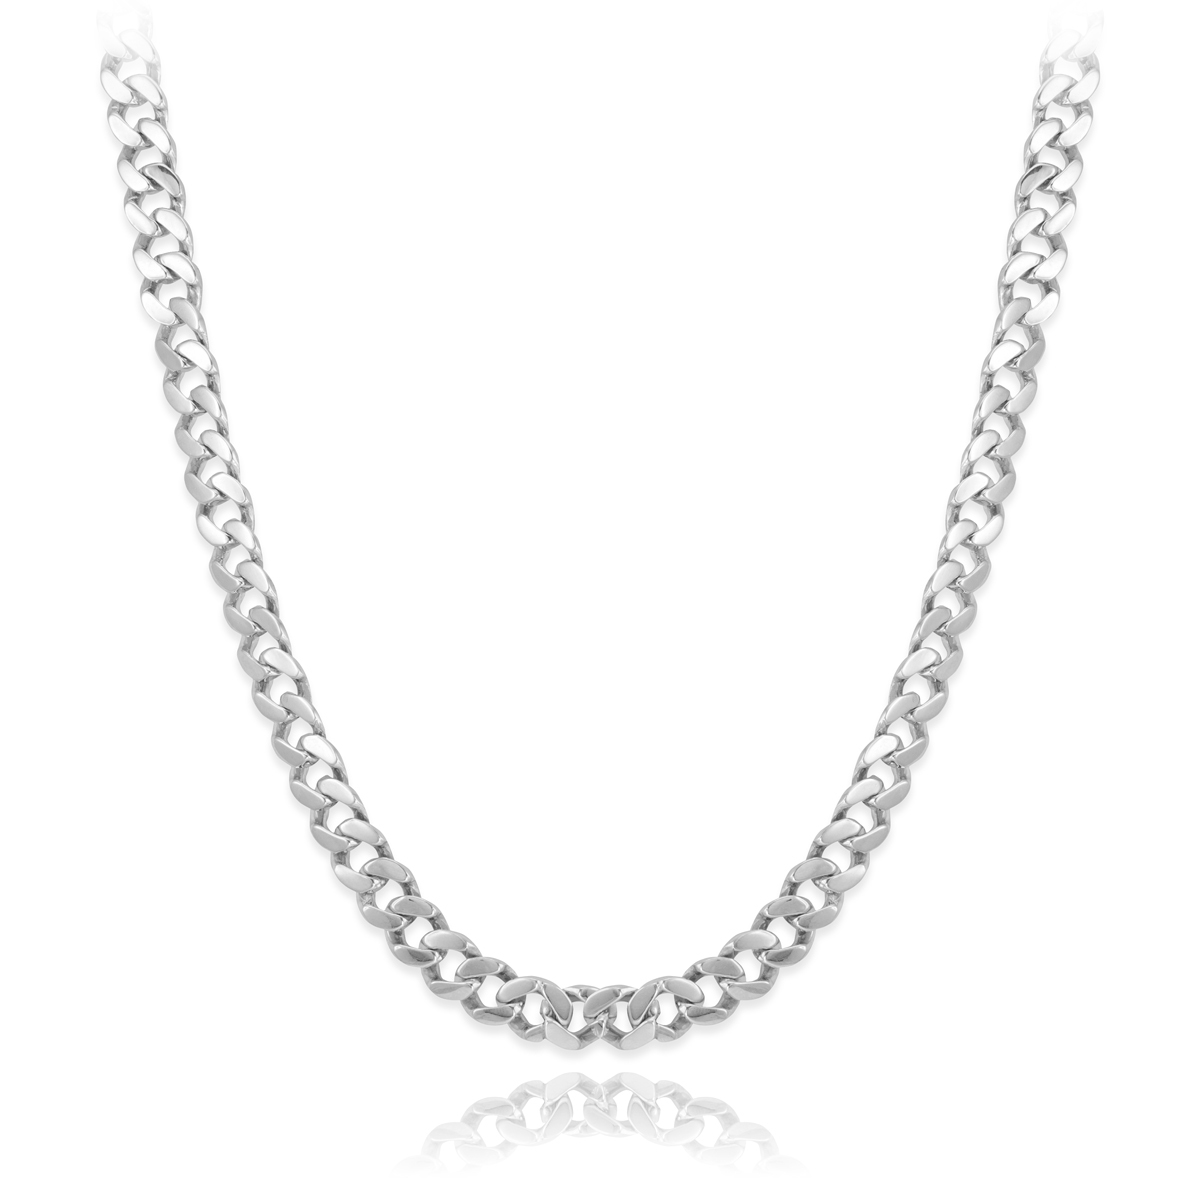 Italian 7.5 Mm Solid 925 Platinum Plated Sterling Silver Beveled Cuban Curb Link Chain, 26 In.